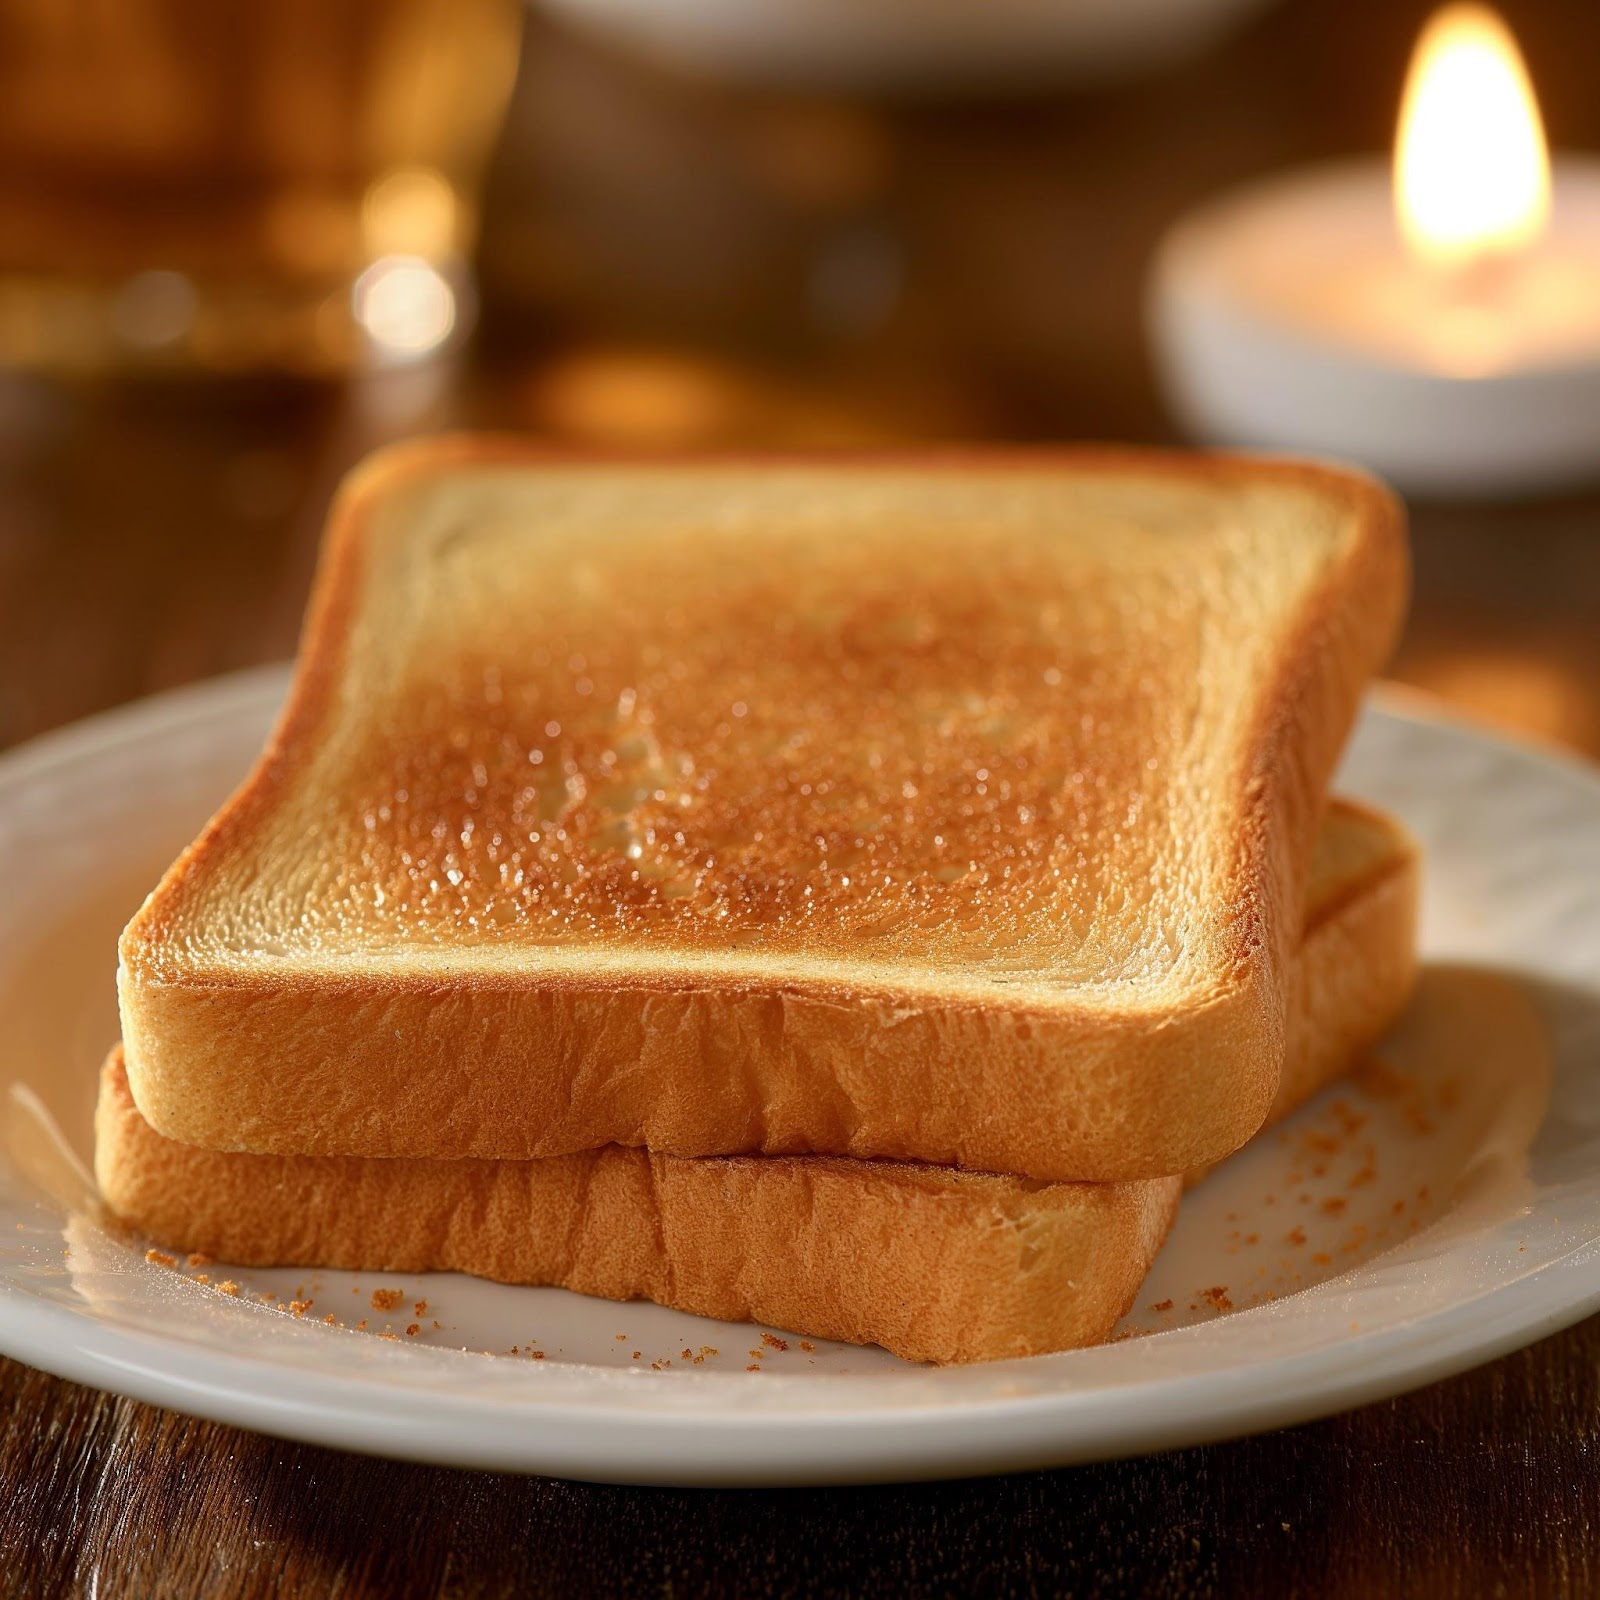 A person spreading Marmite over buttered toast, using a butter knife. The toast is placed on a rustic wooden board, with a small bowl of butter and an open jar of Marmite visible in the background.